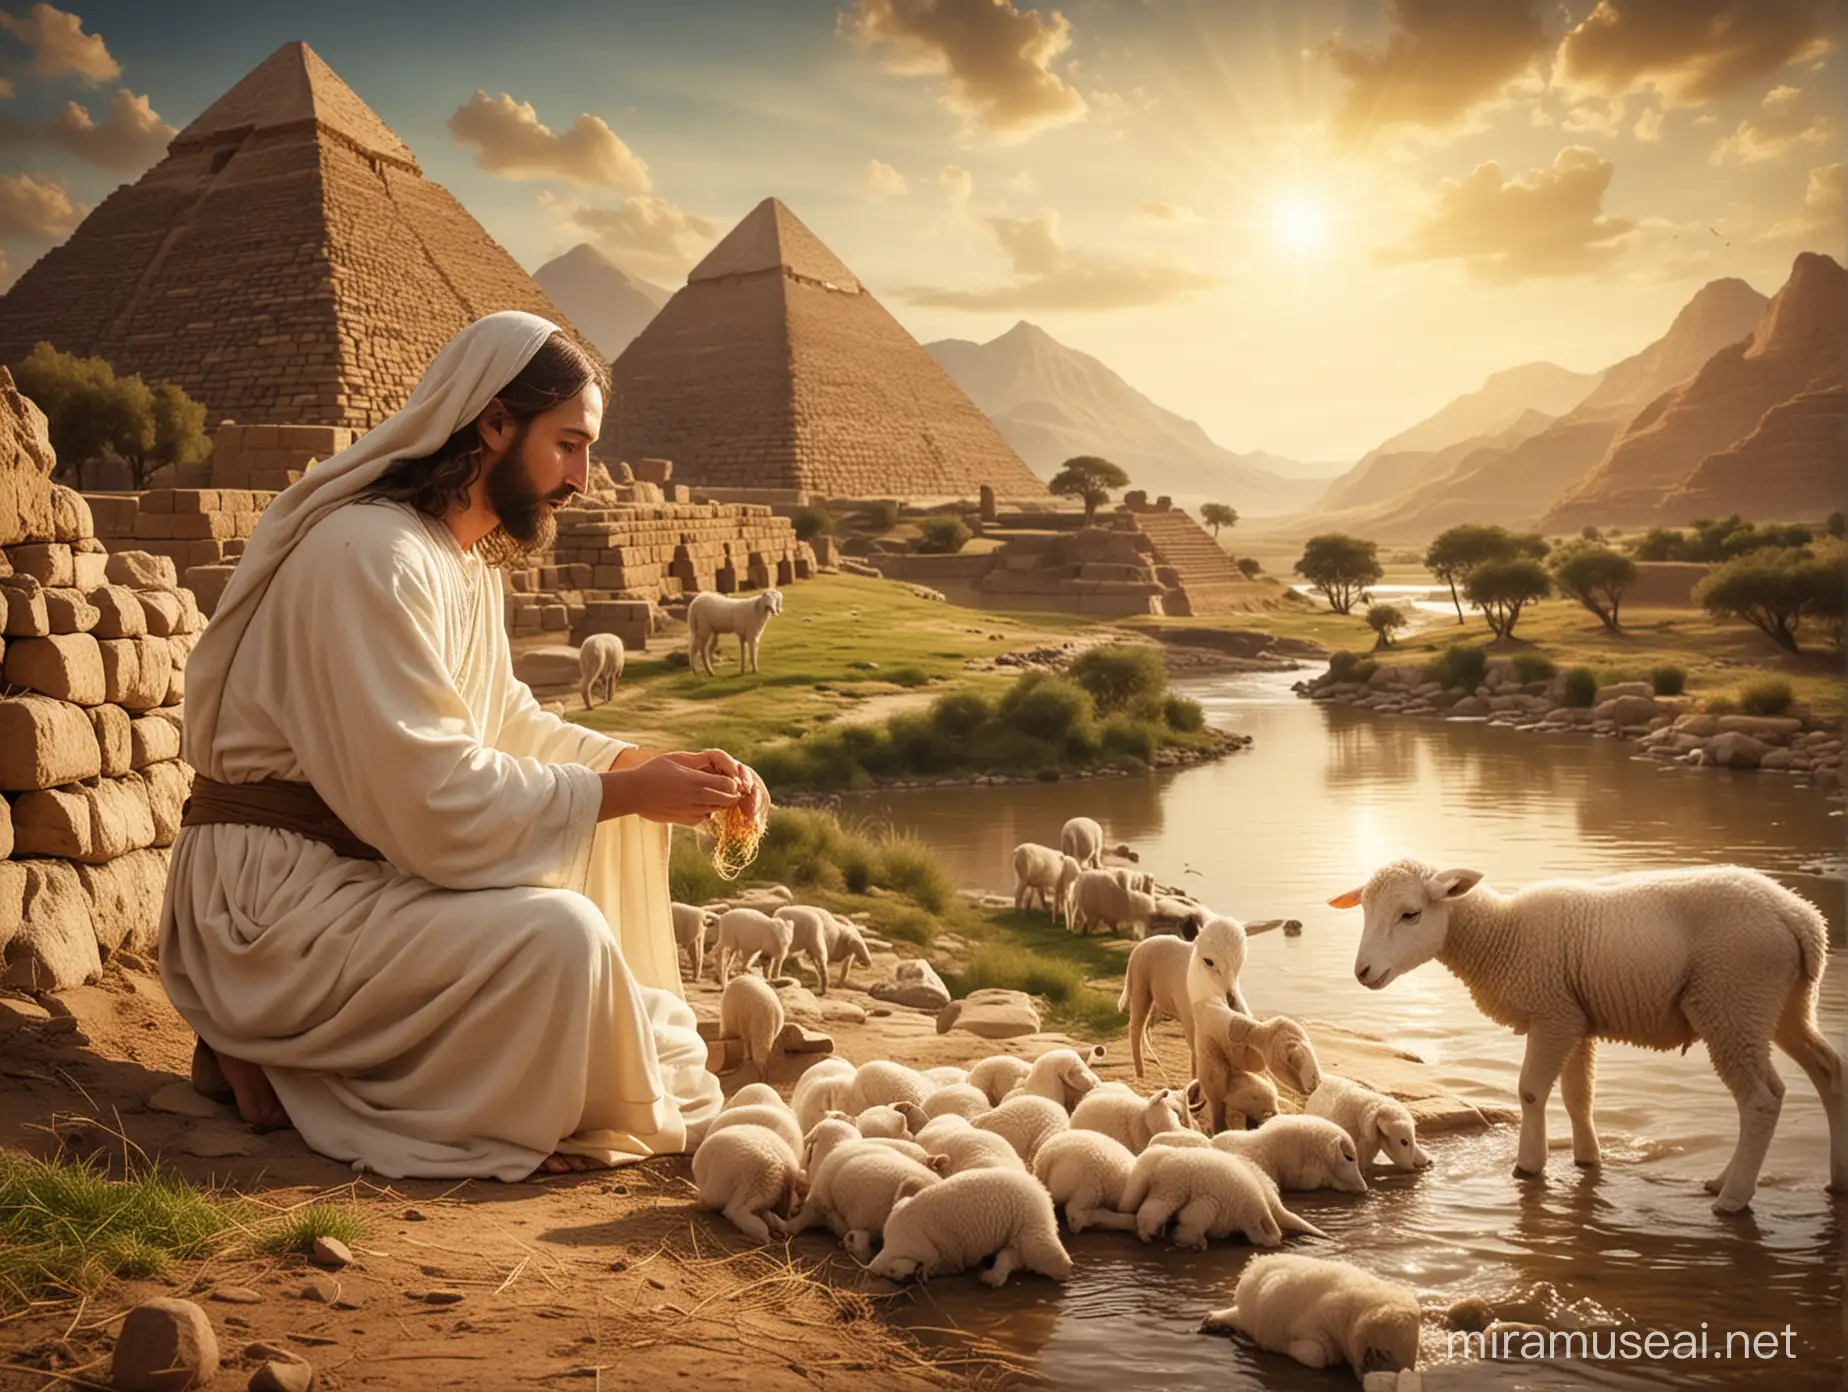 Touching Scene of Jesus as a Child Nurturing a Lamb with a Serene River and Pyramids in the Background